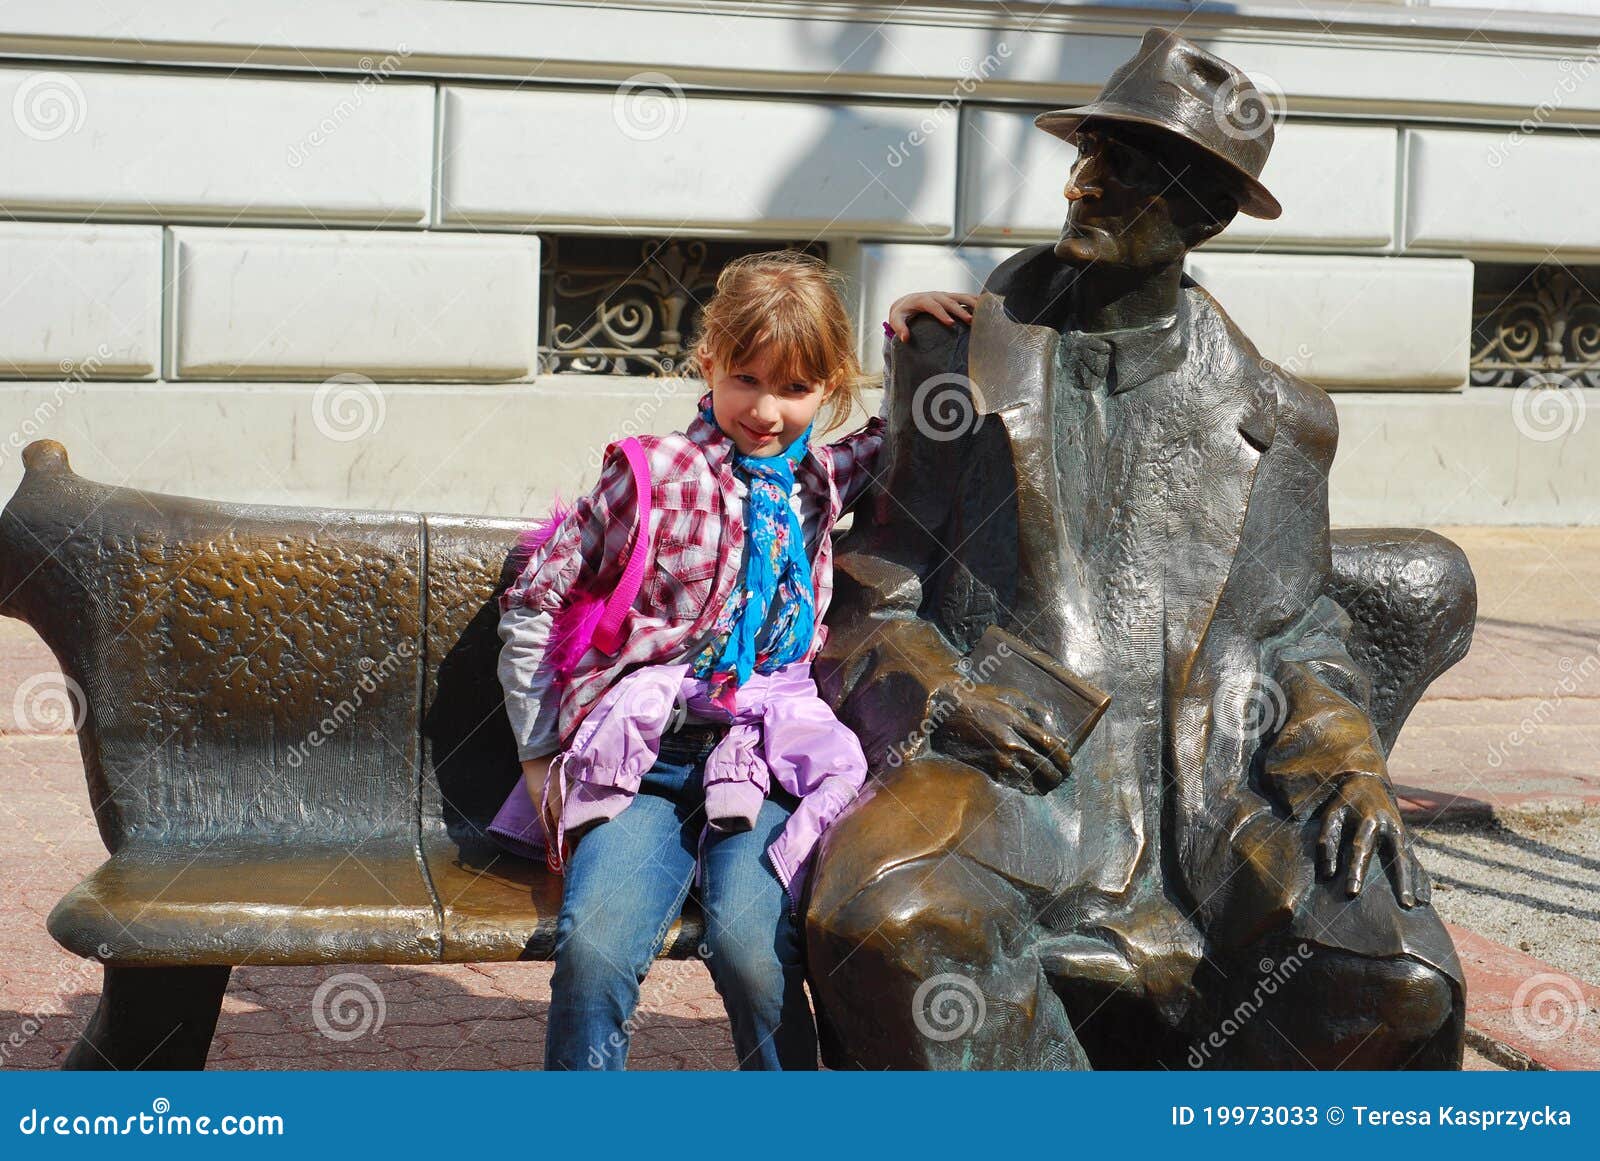 young girl on tuwim`s bench in lodz